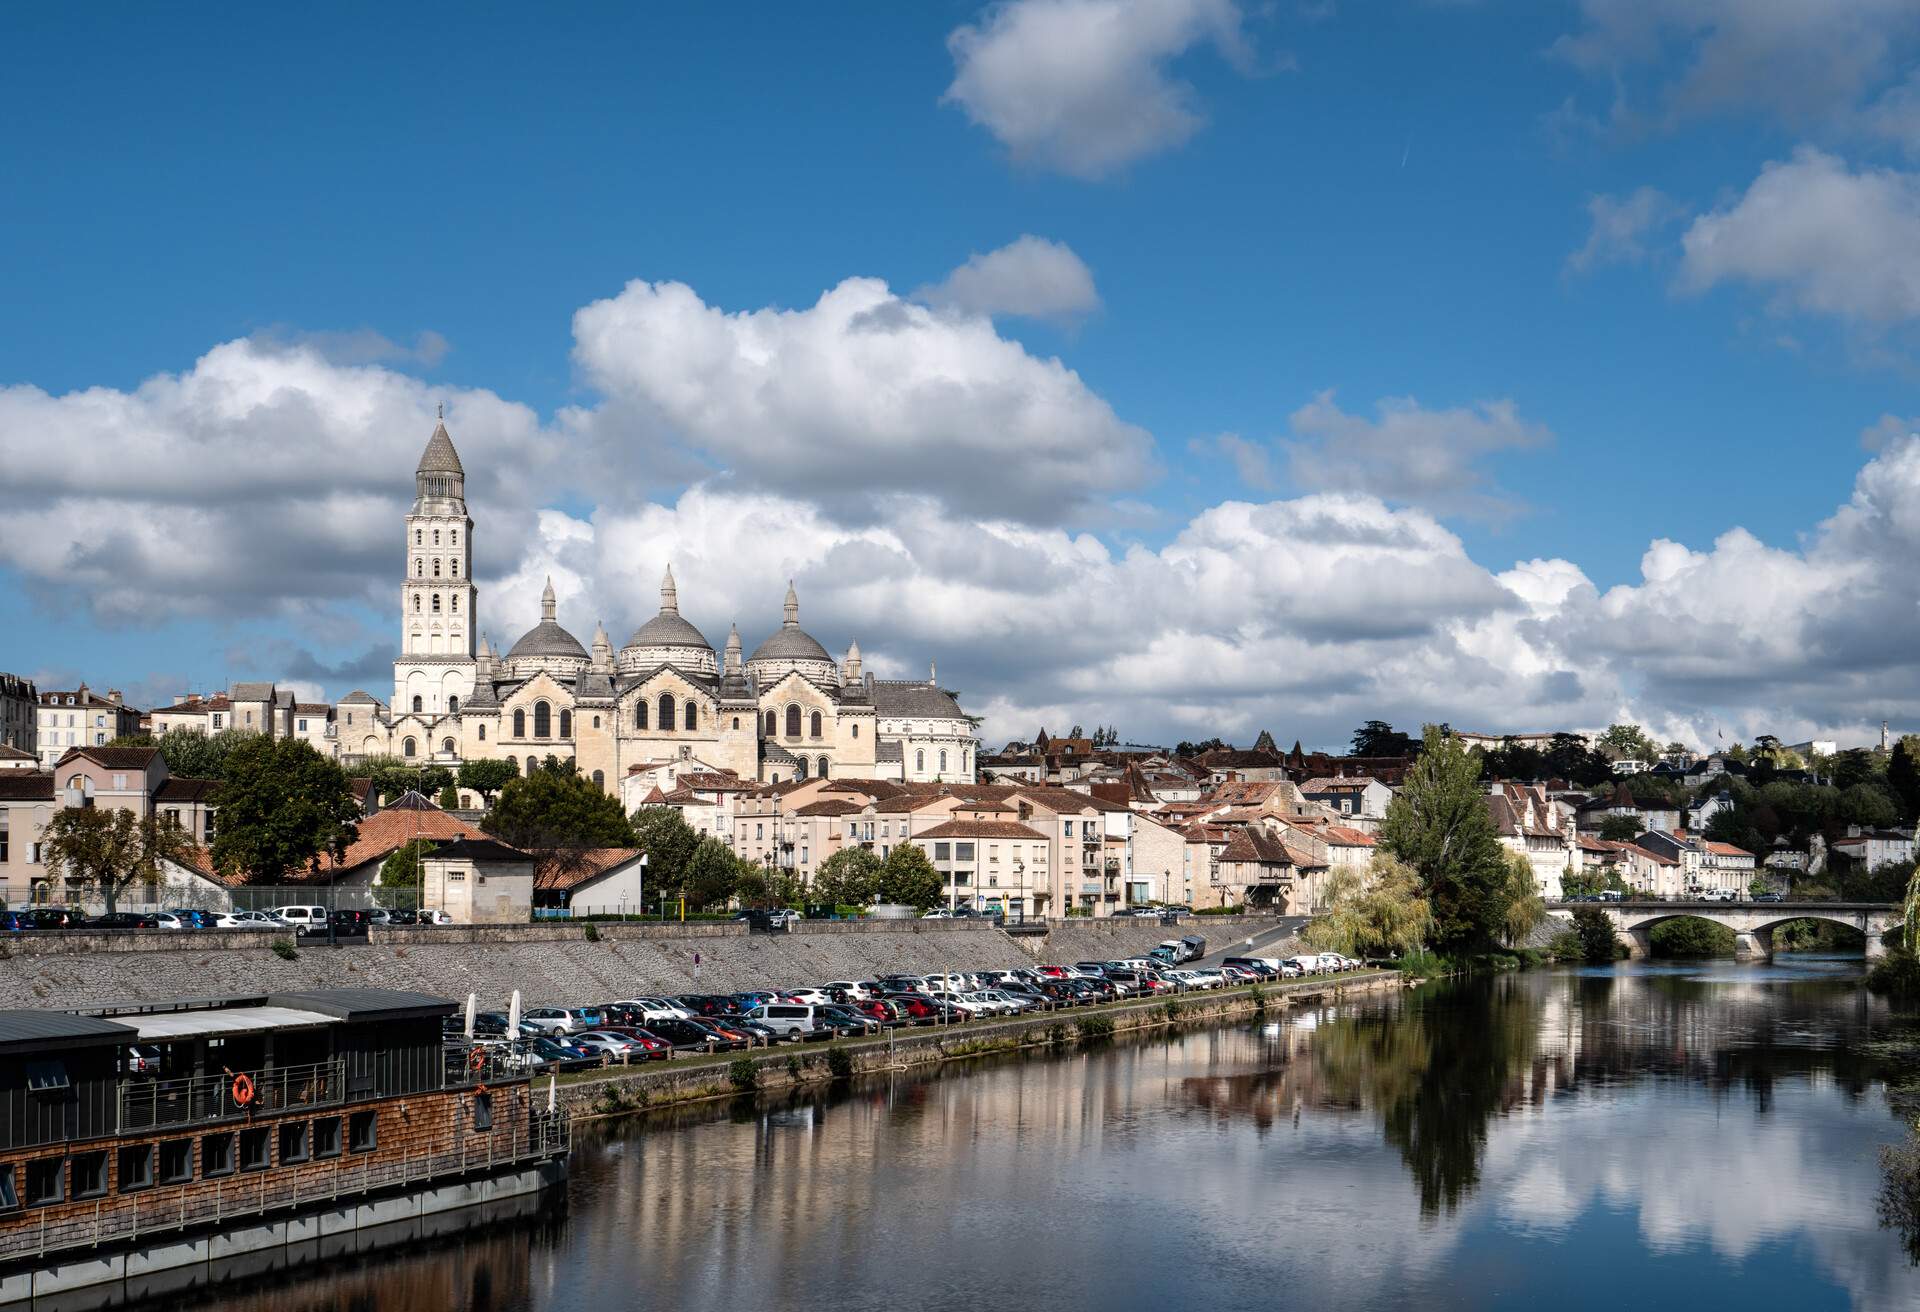 View of the city of Périgueux in France